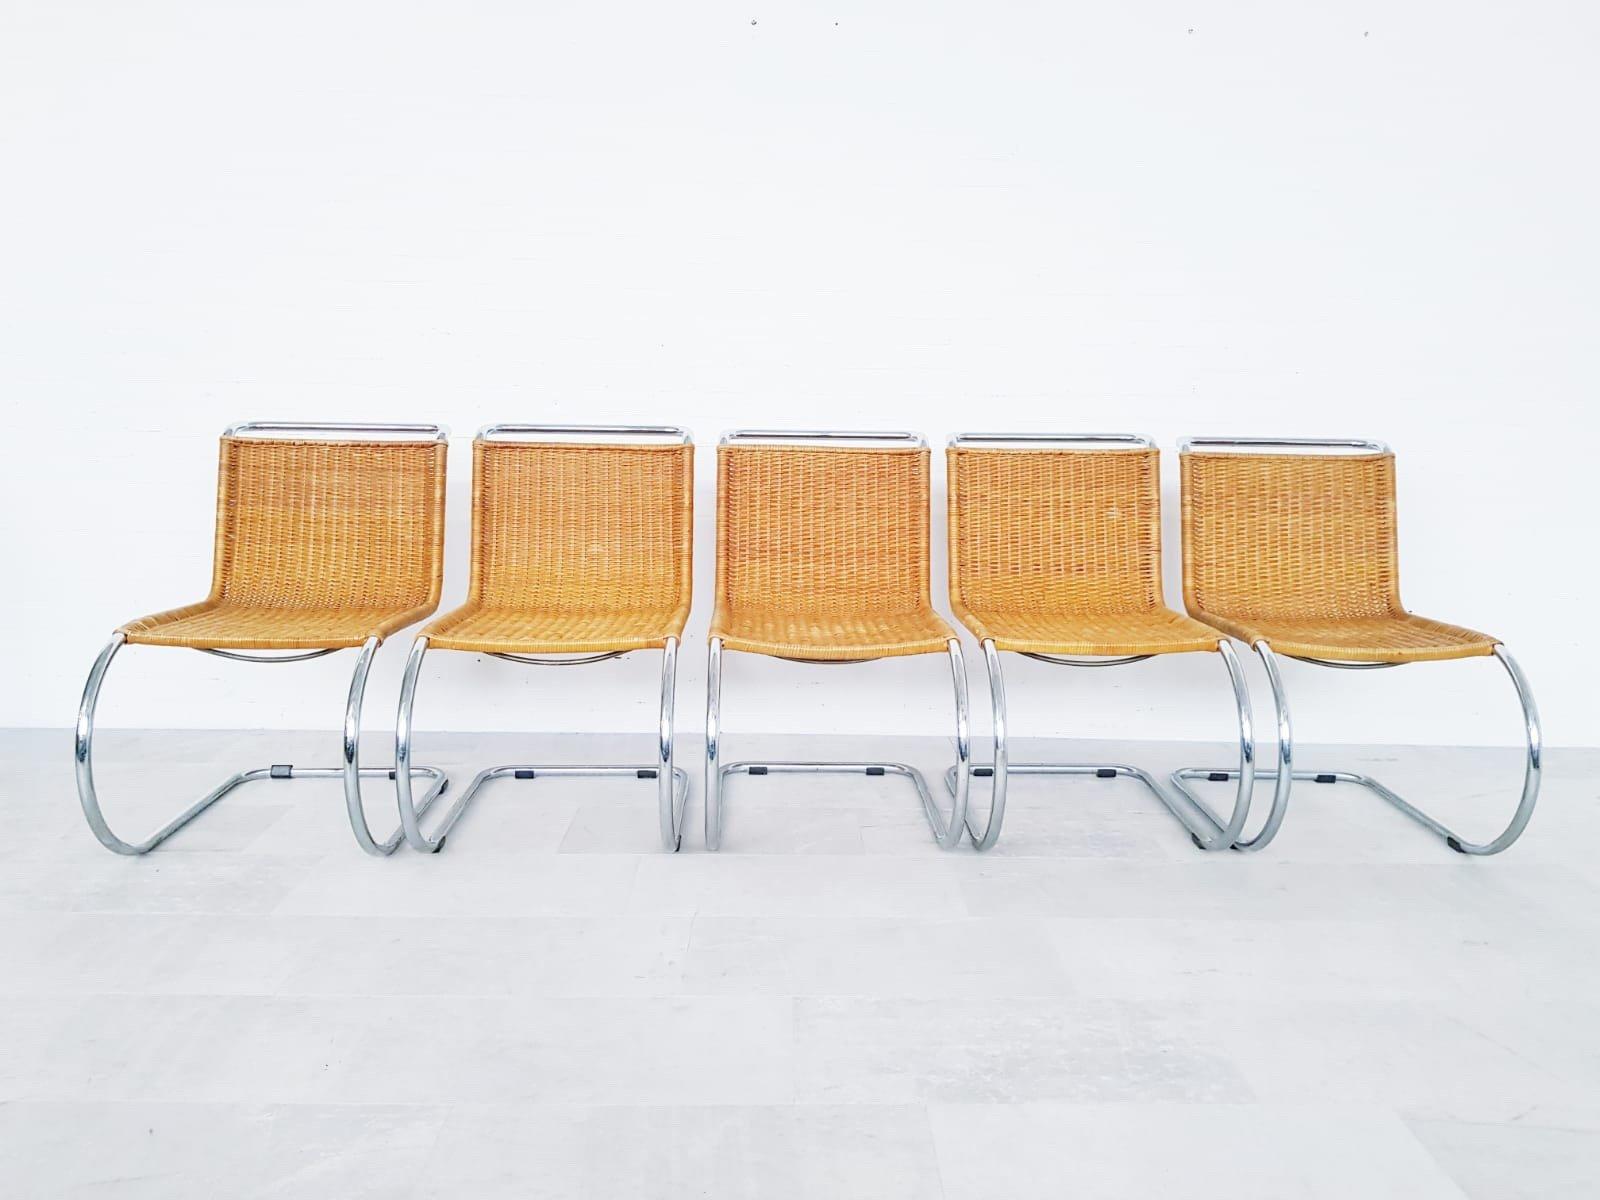 Mies van der Rohe Cantilever Chairs for Thonet